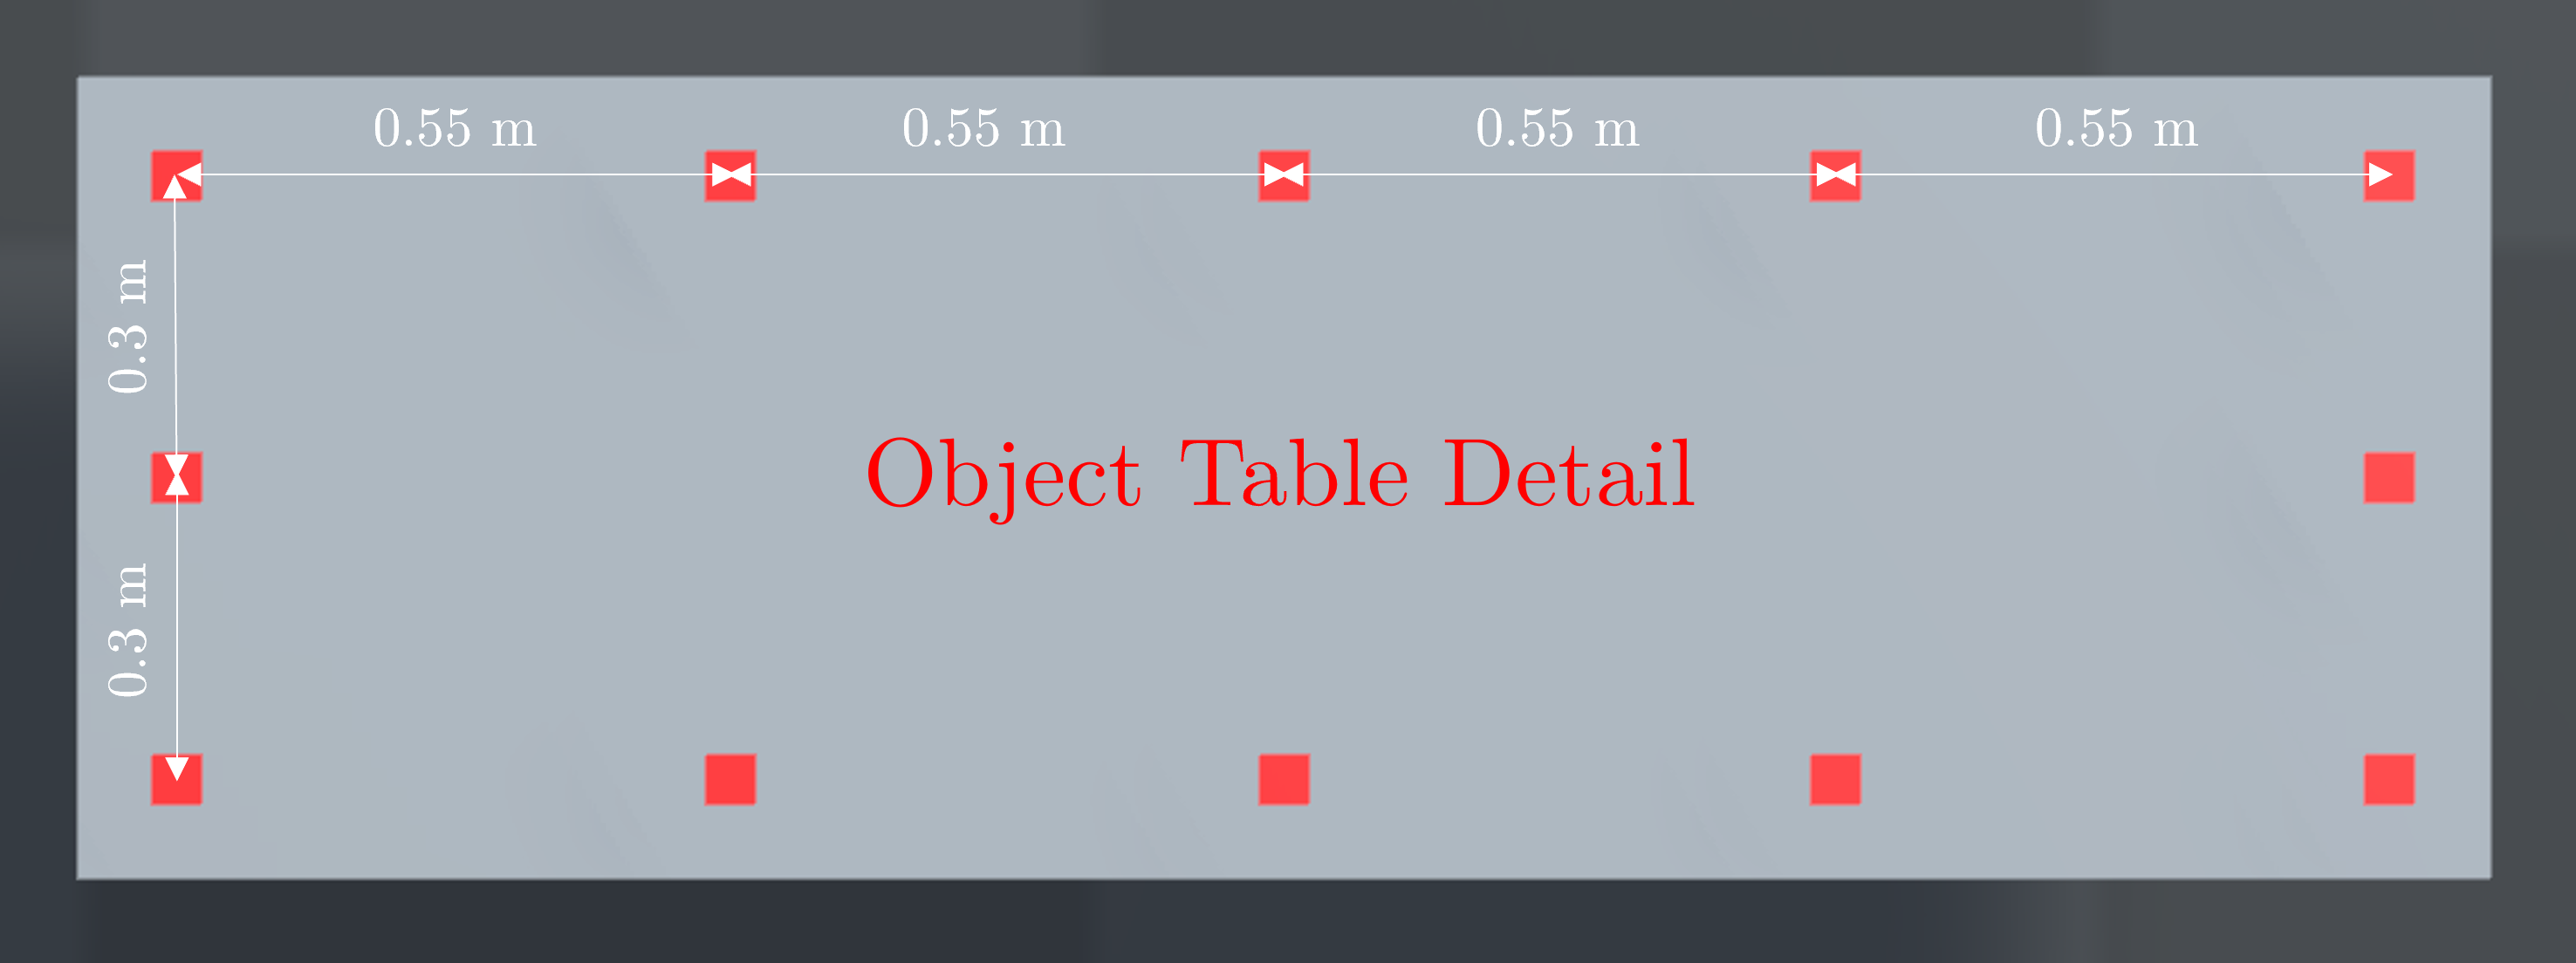 Object Table